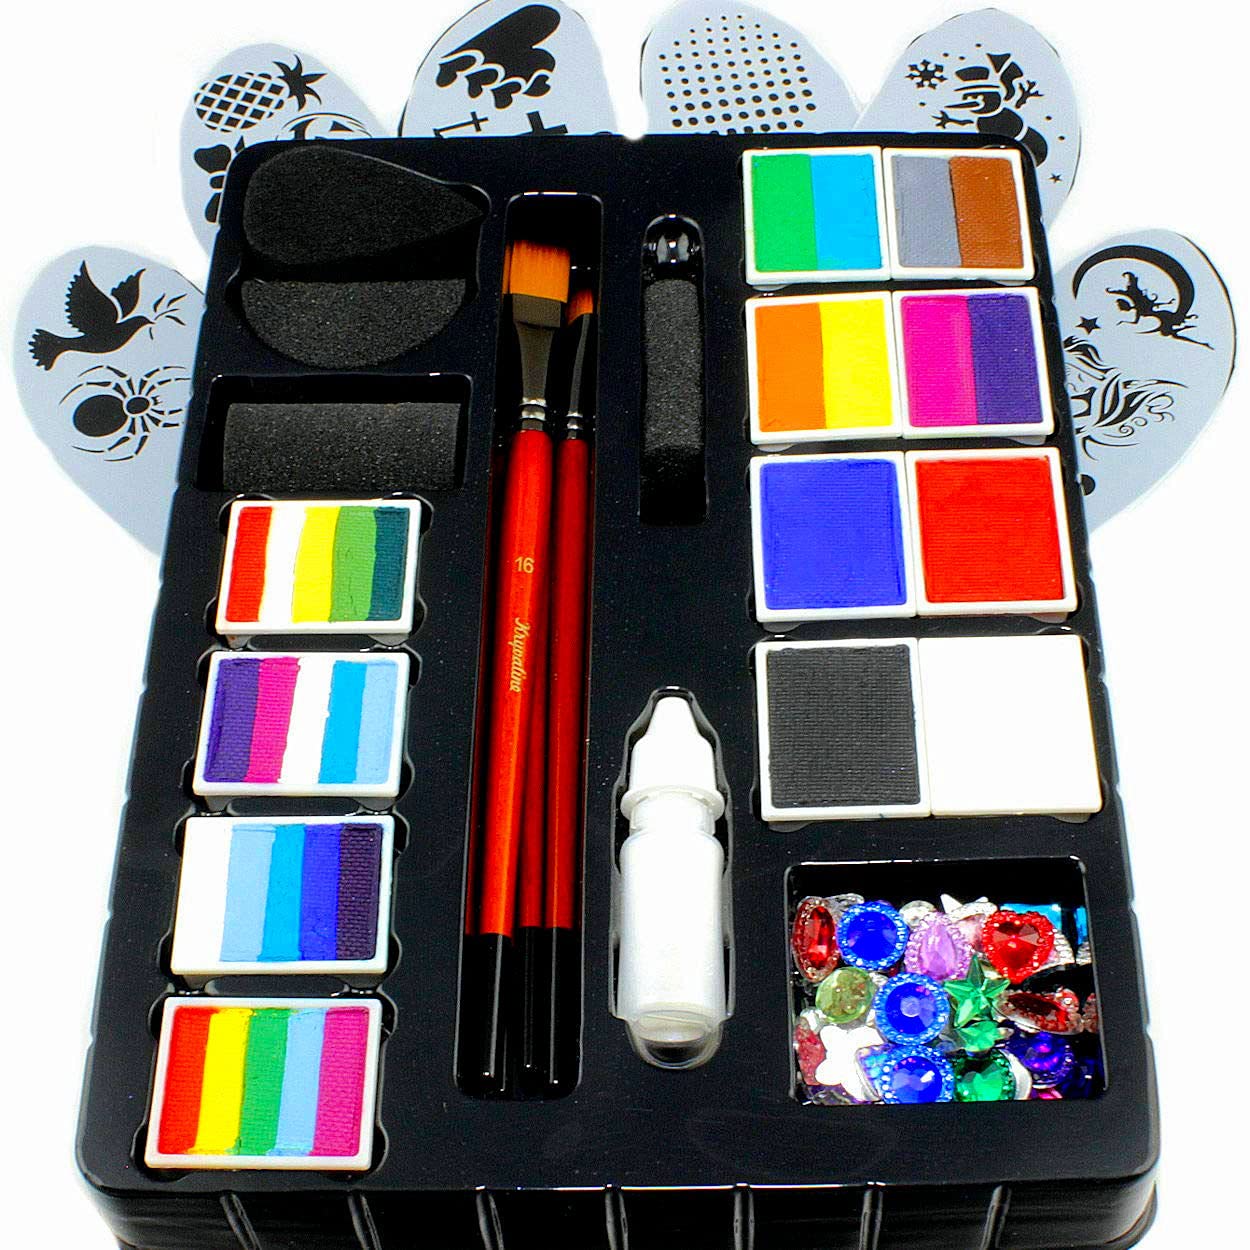 Face Painting beginner kit with Stencils, Brushes and Fine